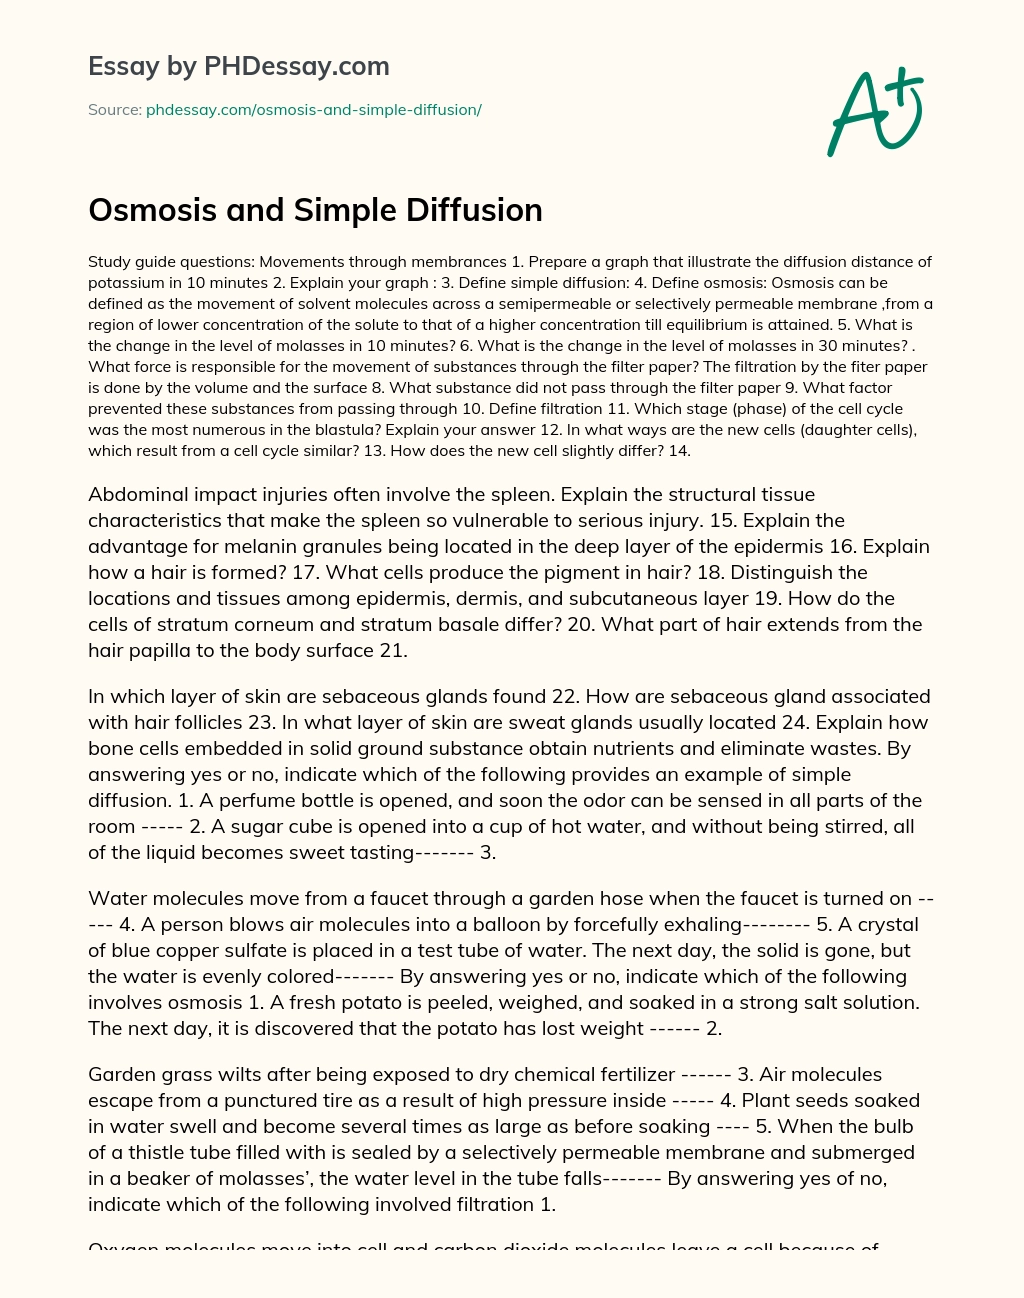 Osmosis and Simple Diffusion essay